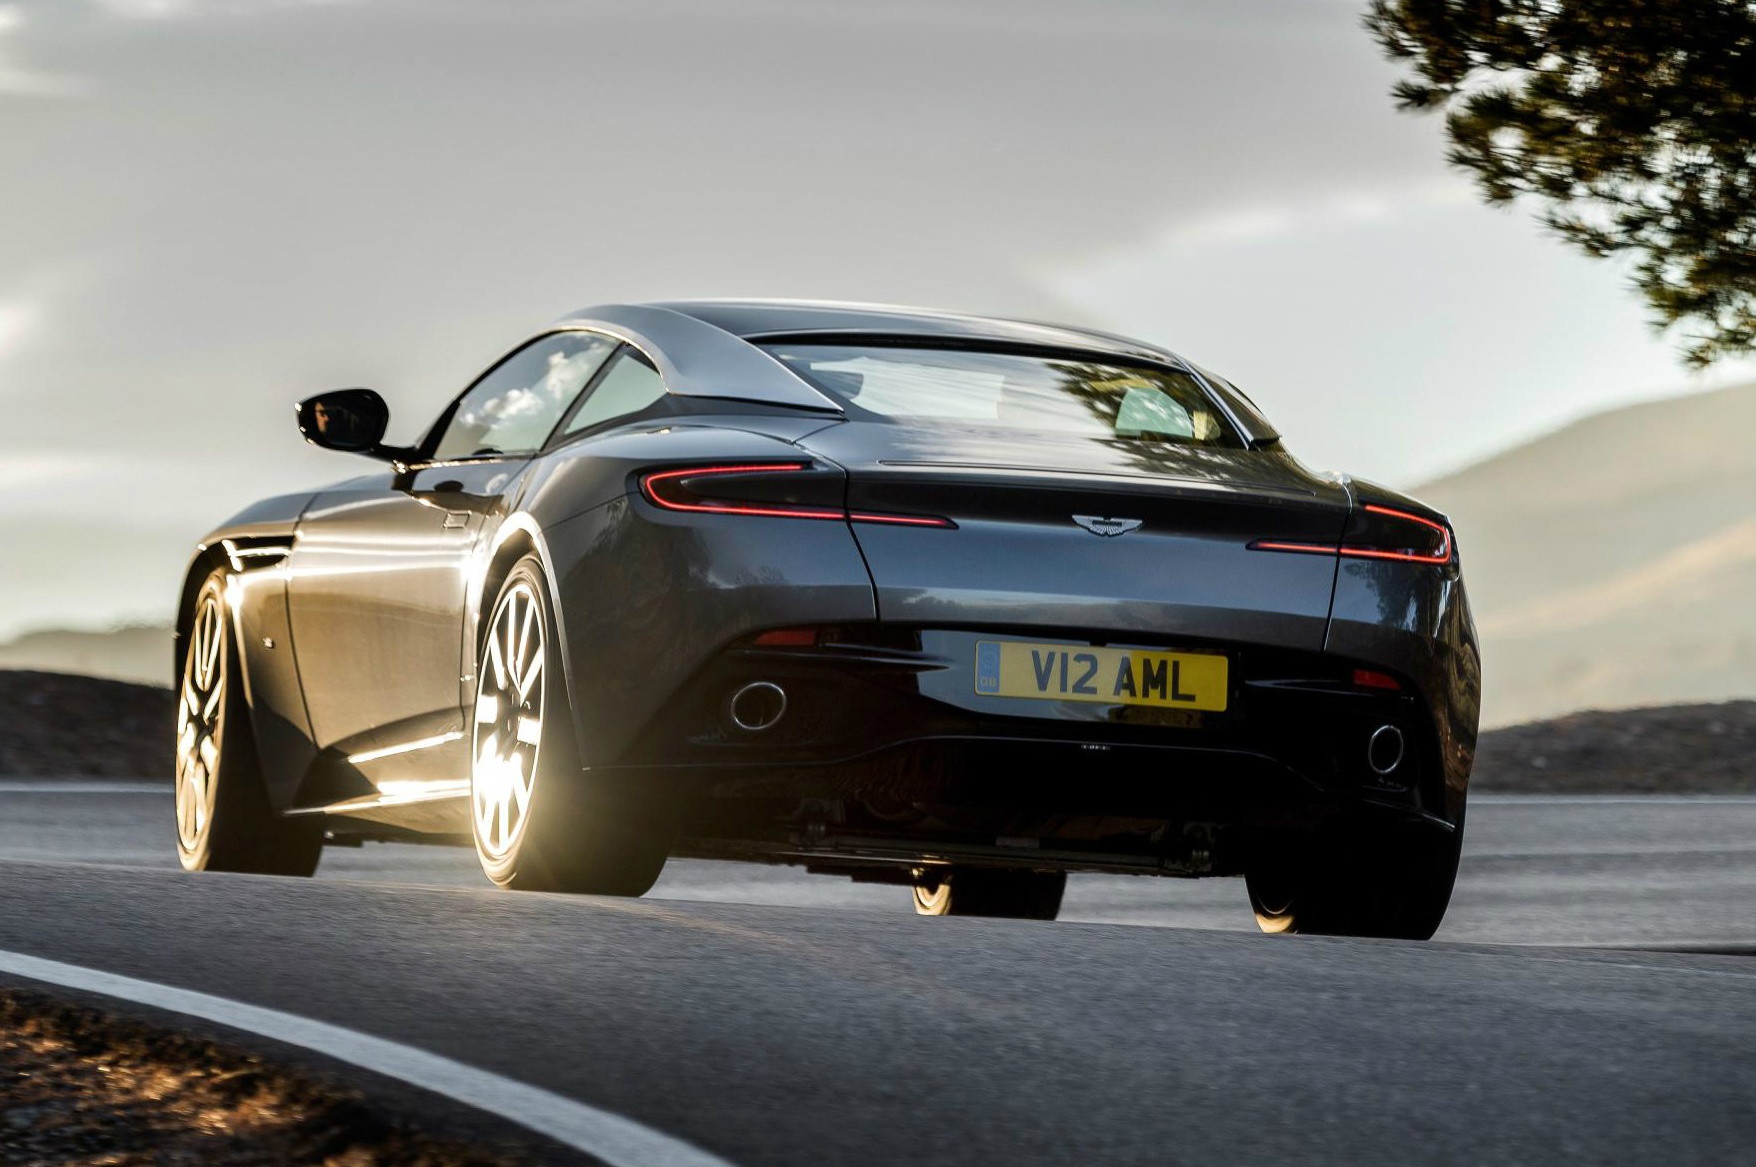 Rear view of the Aston Martin DB11